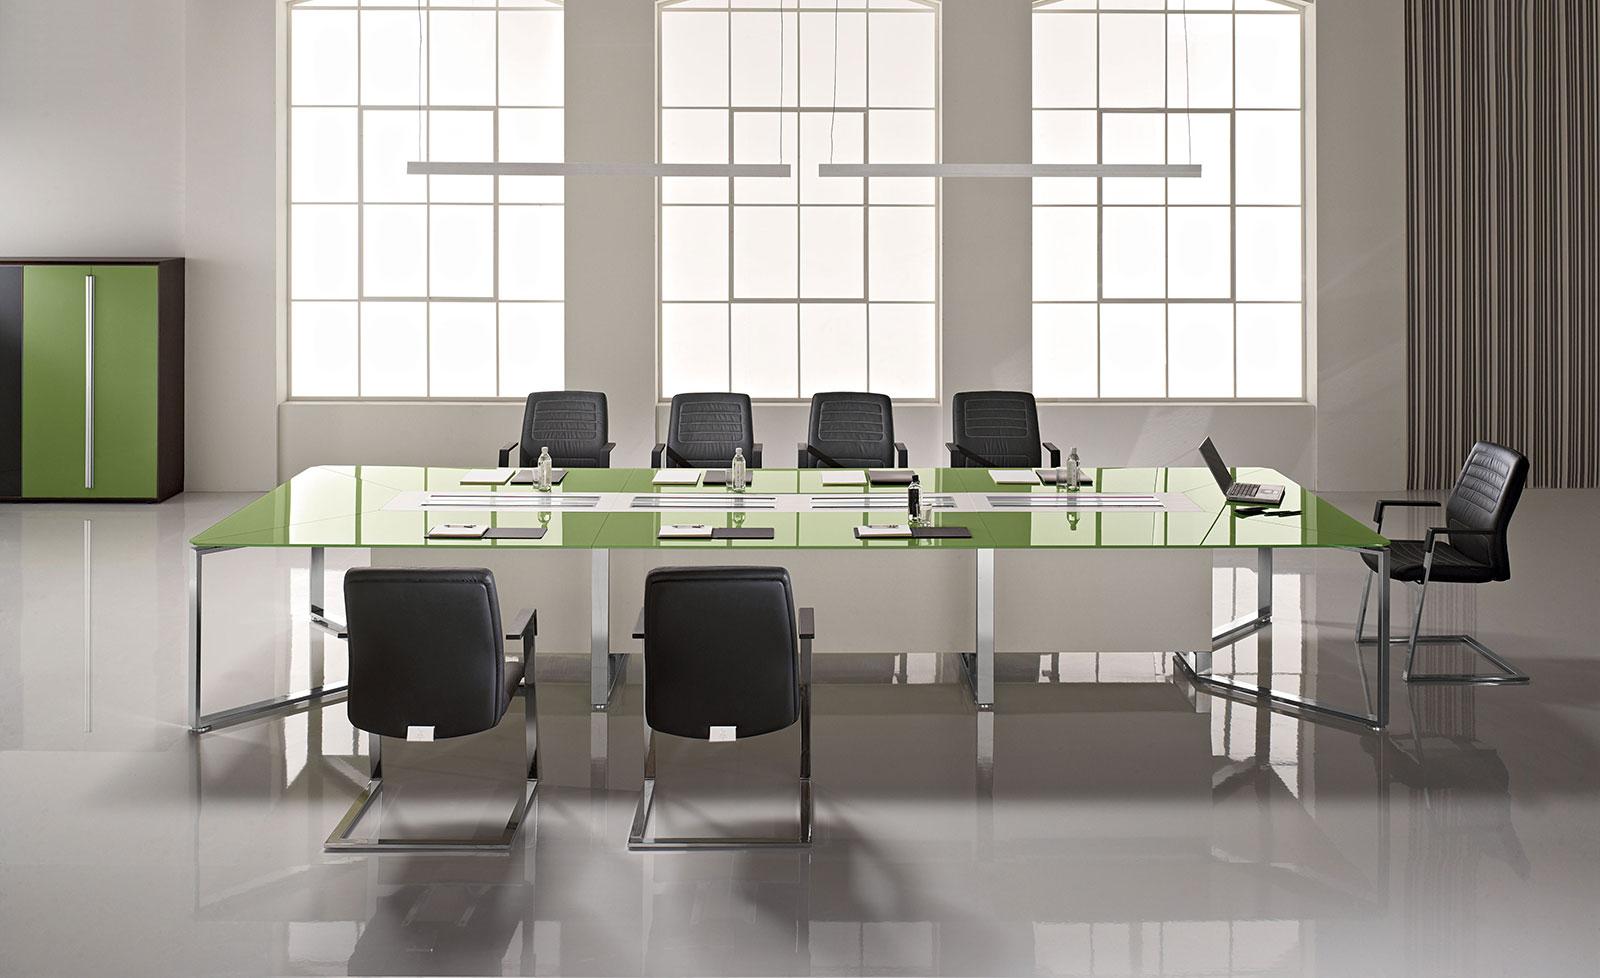 meeting room table size